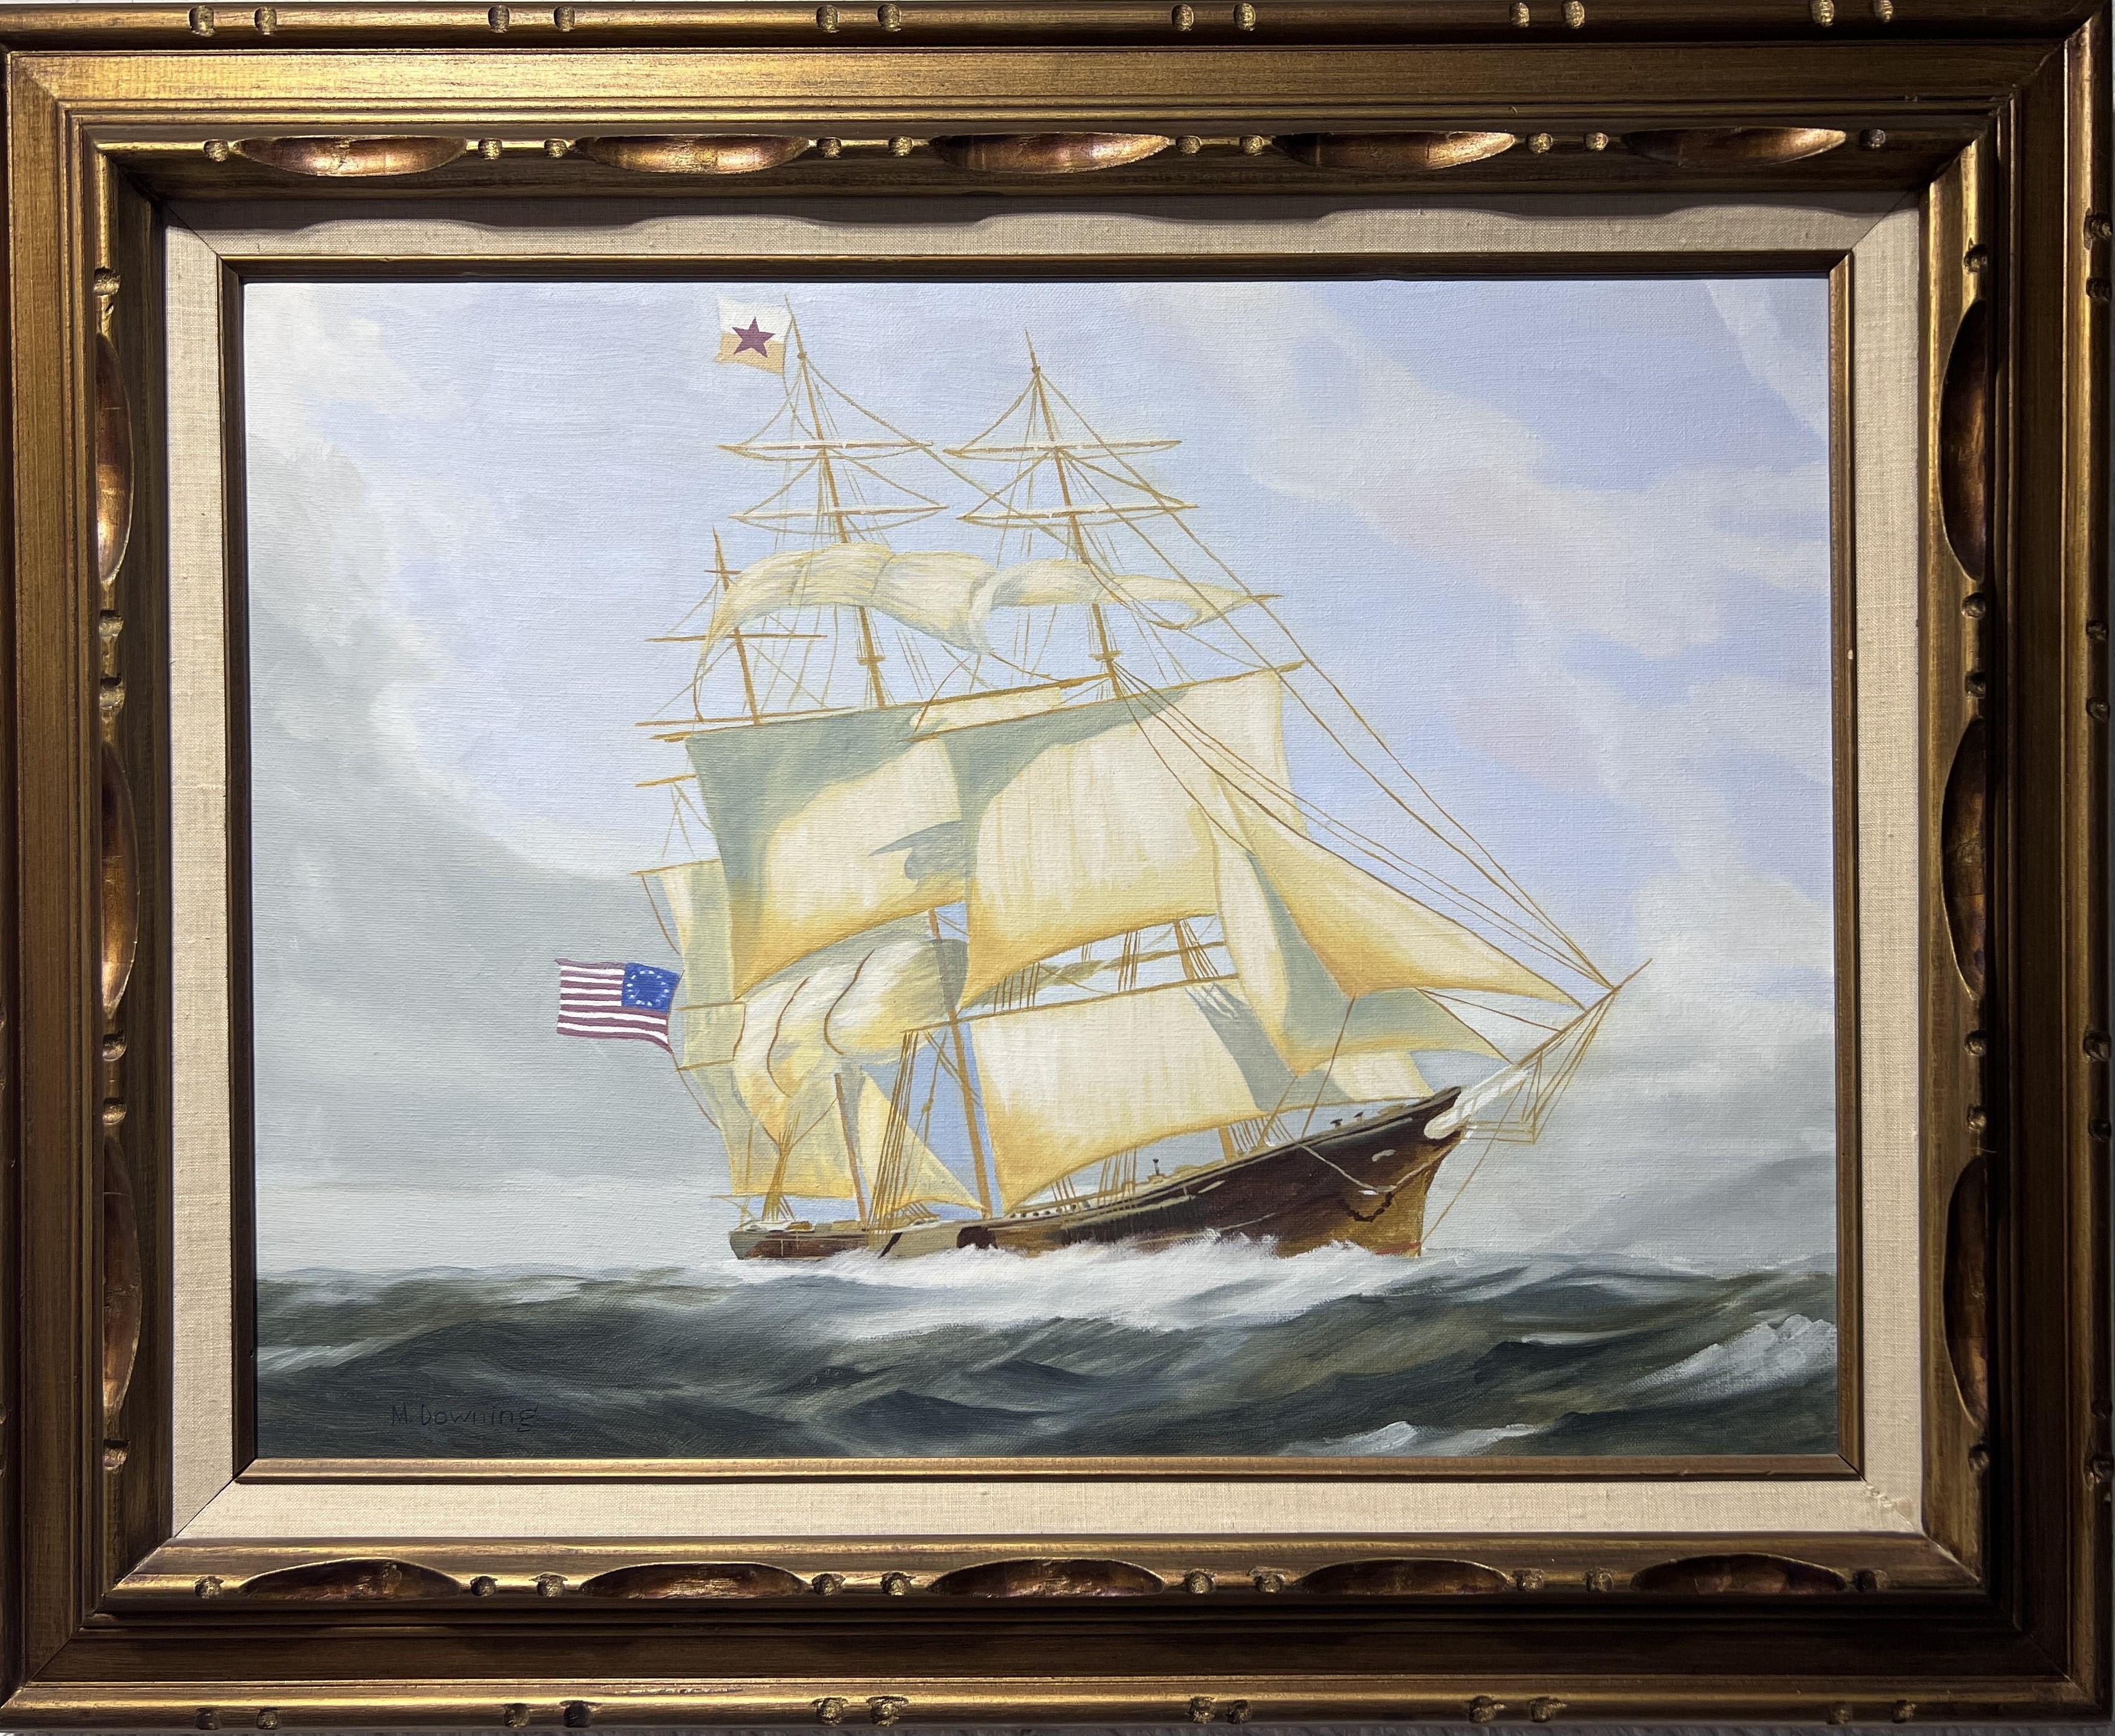 This is an original oil painting on canvas, depicting Sailing Ship on the High Seas. Beautifully done, great blue colors. 

Framed measuring 31.5 "x 25.5" & painting measures 24 "x 18".

Presented in a wood frame. 

The painting is in good